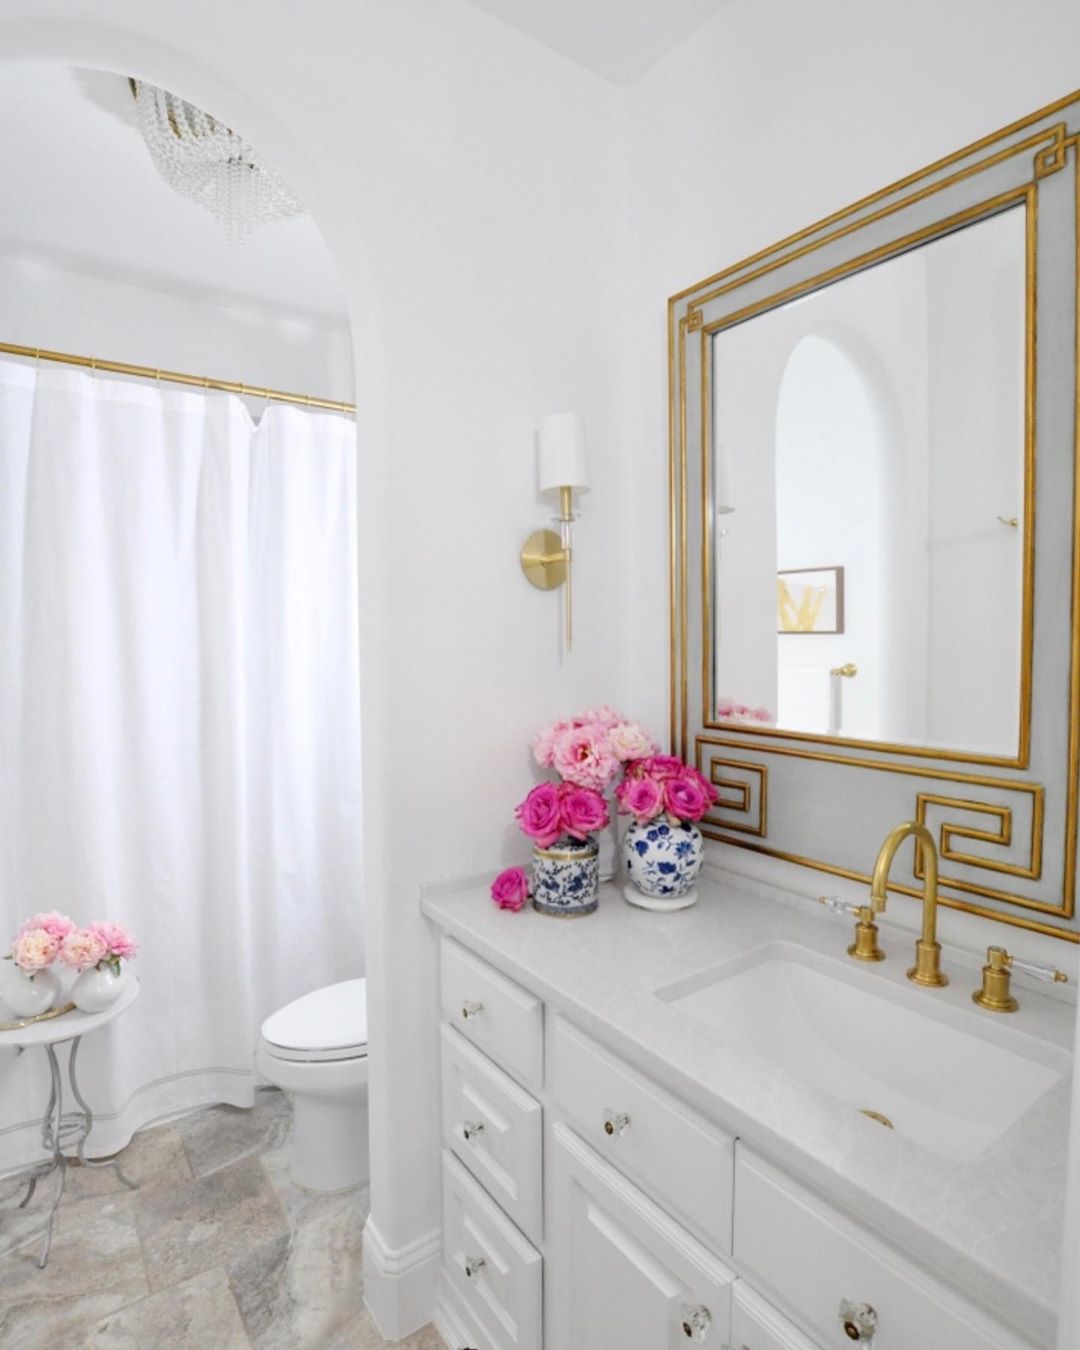 10 Best Glam Bathroom Decor Ideas You'll Swoon Over